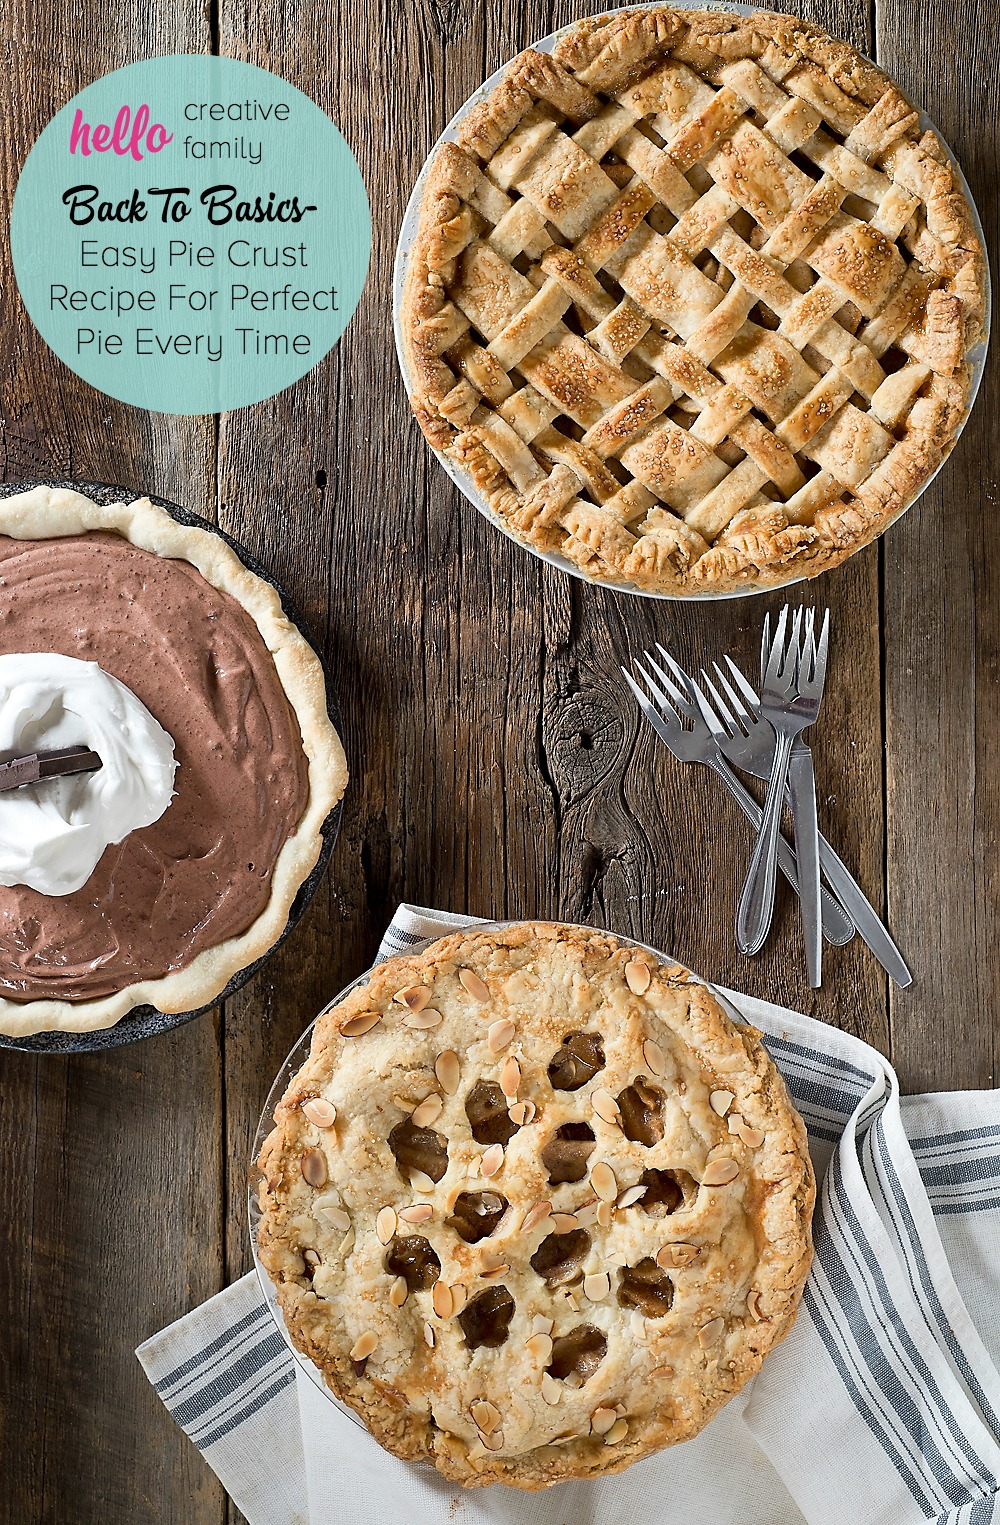 Hello Creative Family's resident baker shares her easy pie crust recipe along with 5 tips and tricks for perfect pie crust every time!